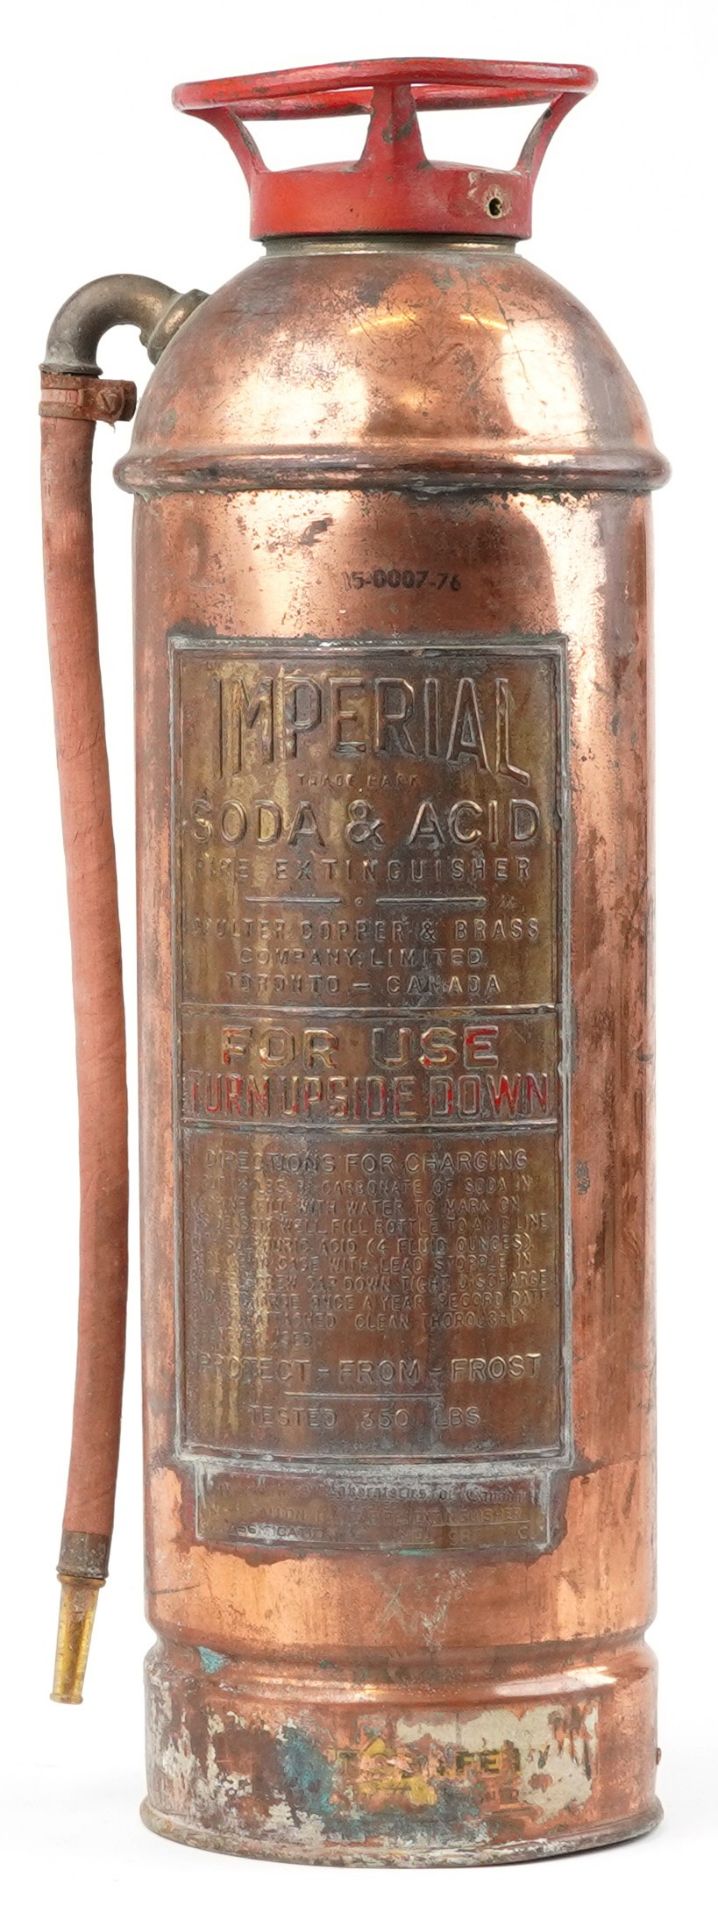 Vintage Canadian Imperial soda and acid copper fire extinguisher with brass plaques, 60.5cm high